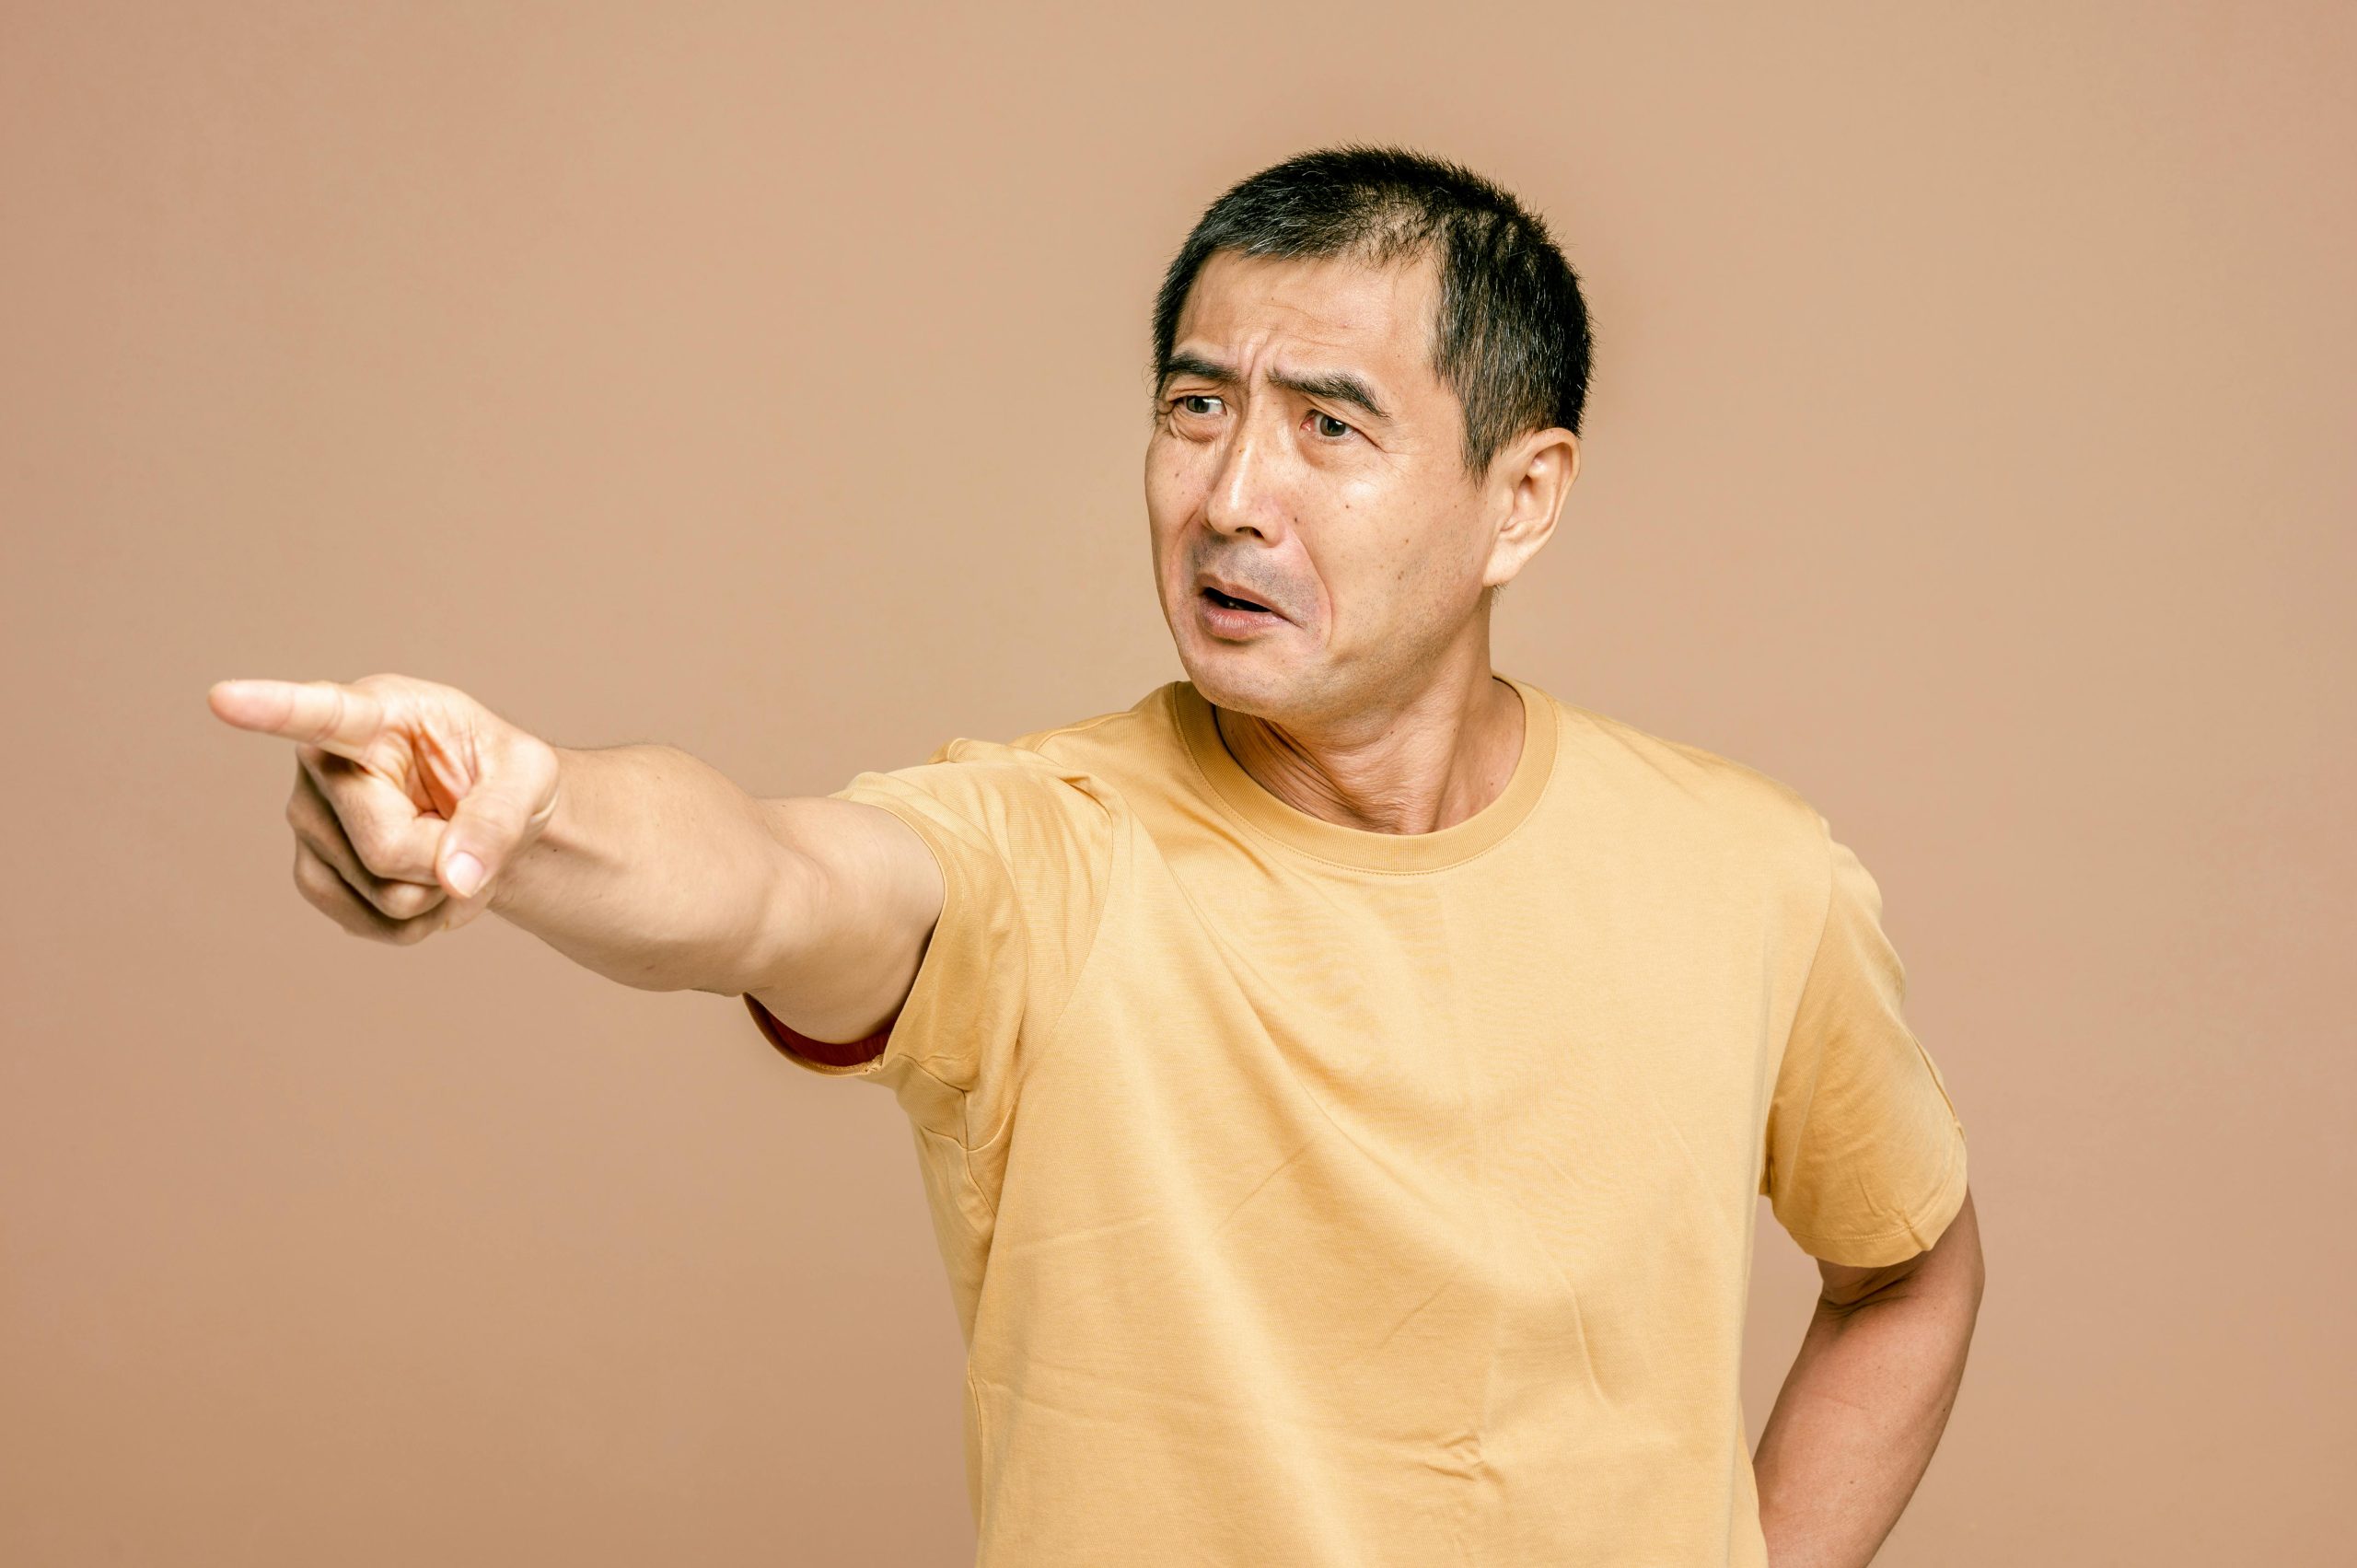 Man in Yellow Crew Neck T-shirt Pointing a Finger